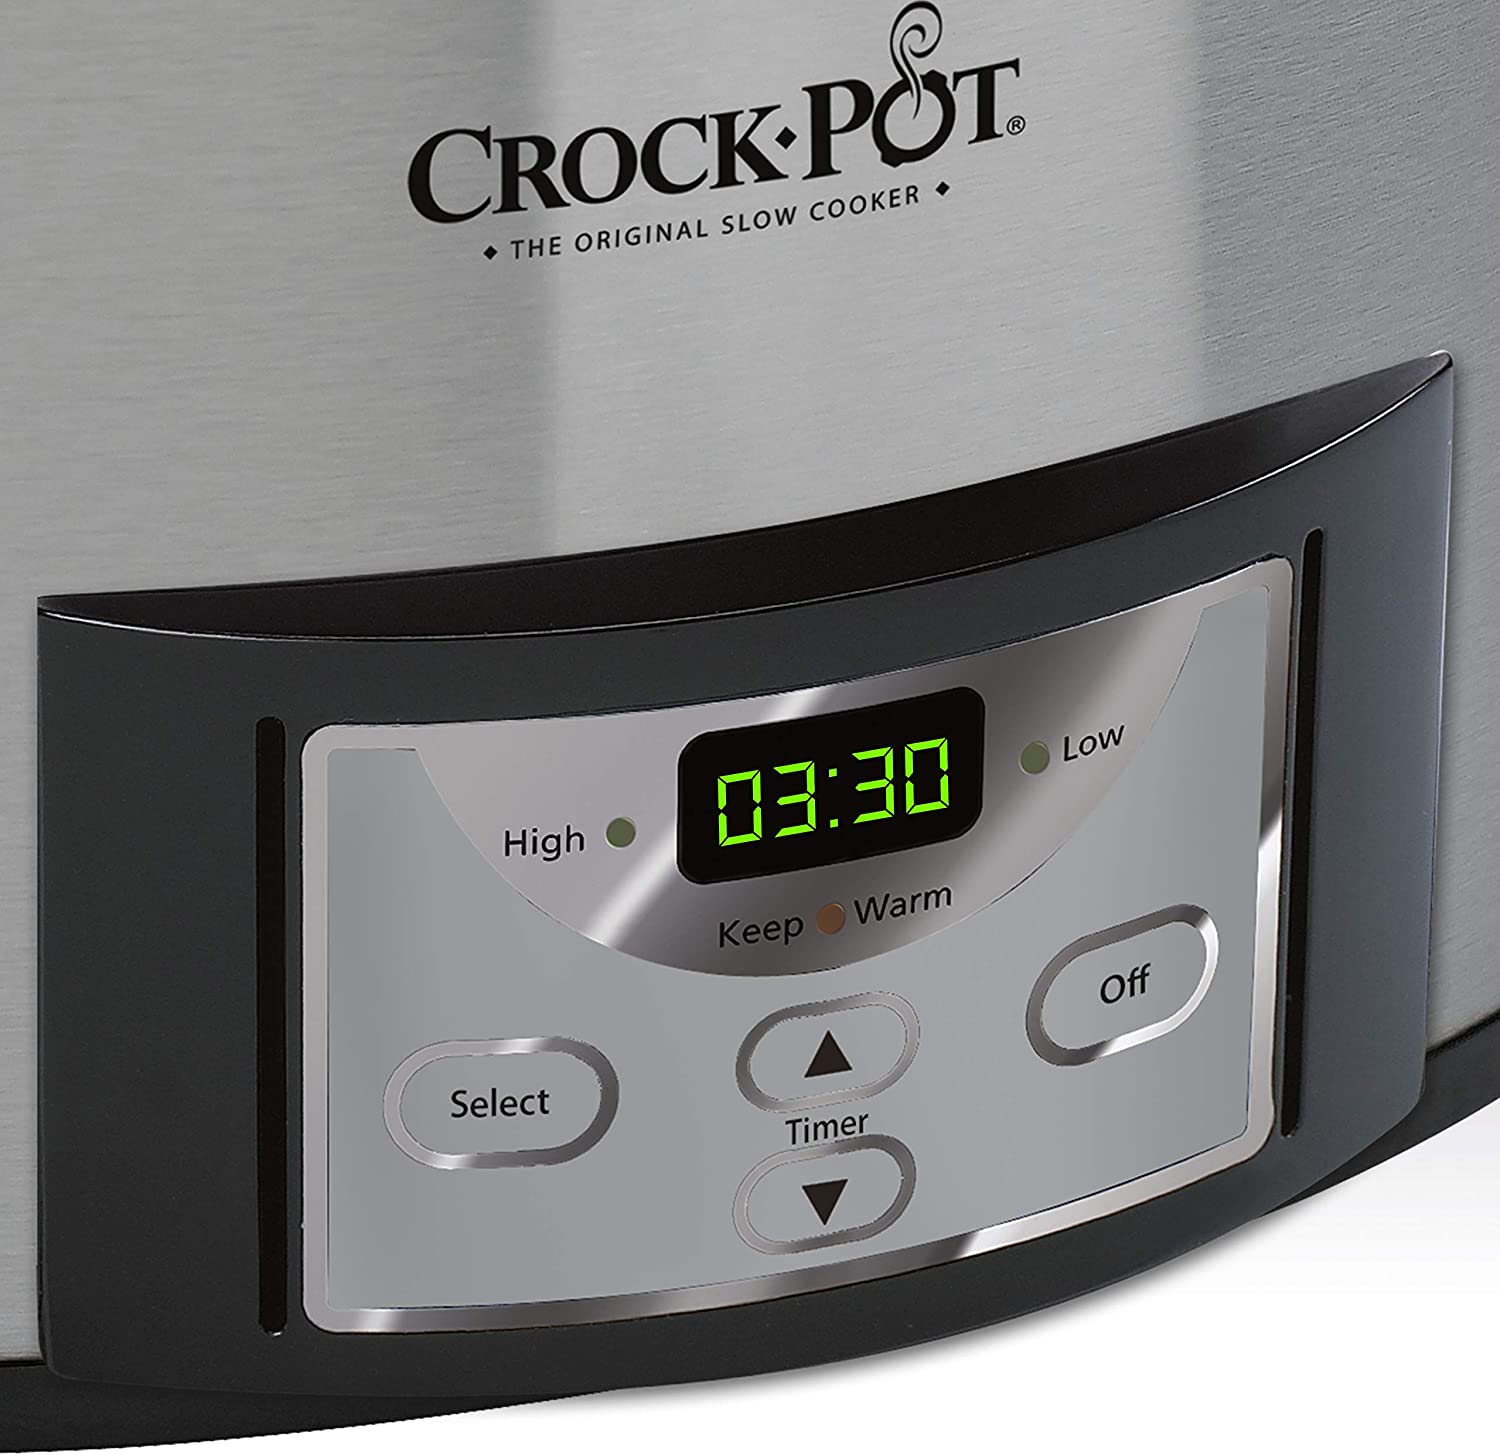 https://discounttoday.net/wp-content/uploads/2022/11/Crock-Pot-SCCPVL610-S-A-6-Quart-Cook-Carry-Programmable-Slow-Cooker-with-Digital-Timer-Stainless-Steel3.jpg